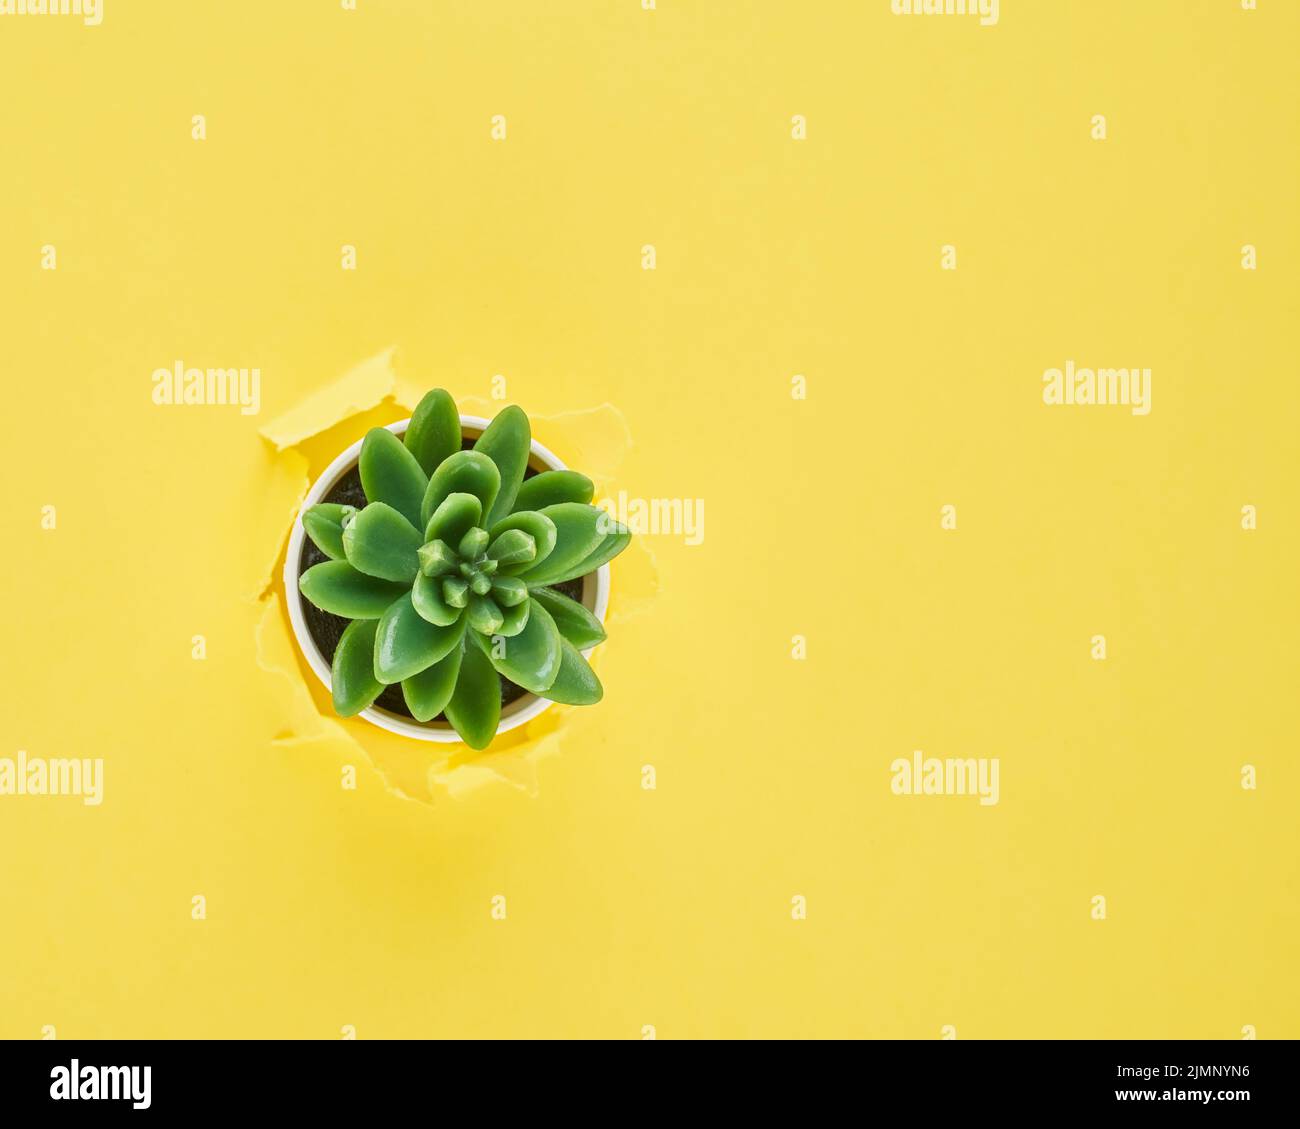 A ripped hole in yellow textured background, cactus flower pot, concept of rupted paper with copy space. Long width side banner. Stock Photo